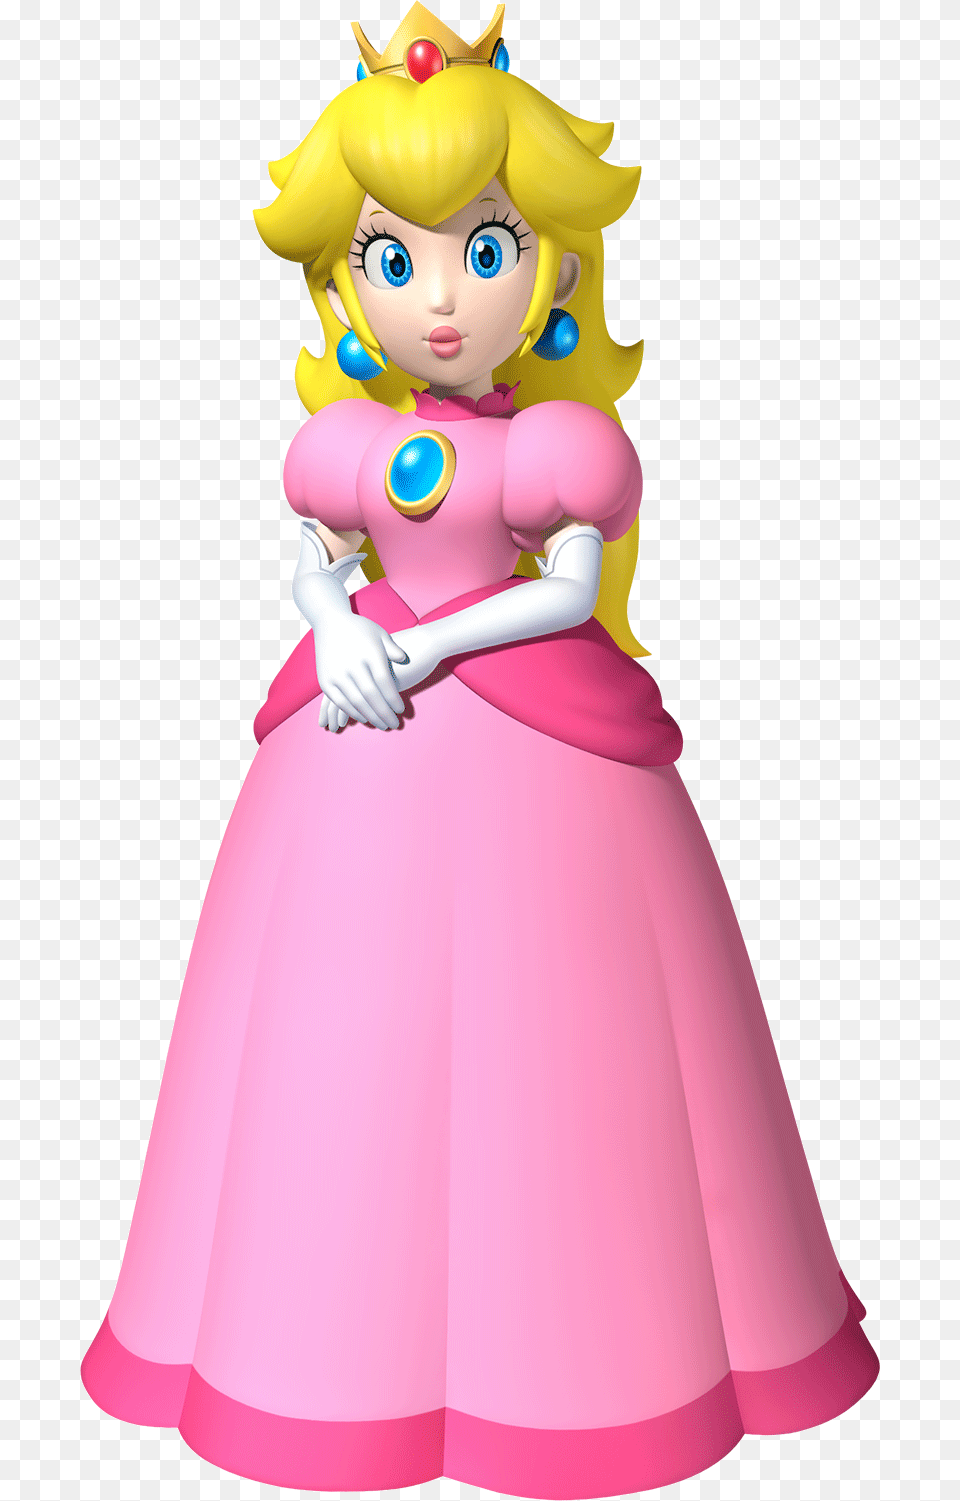 Personajes Princess Peach New Super Mario Bros, Doll, Toy, Baby, Face Png